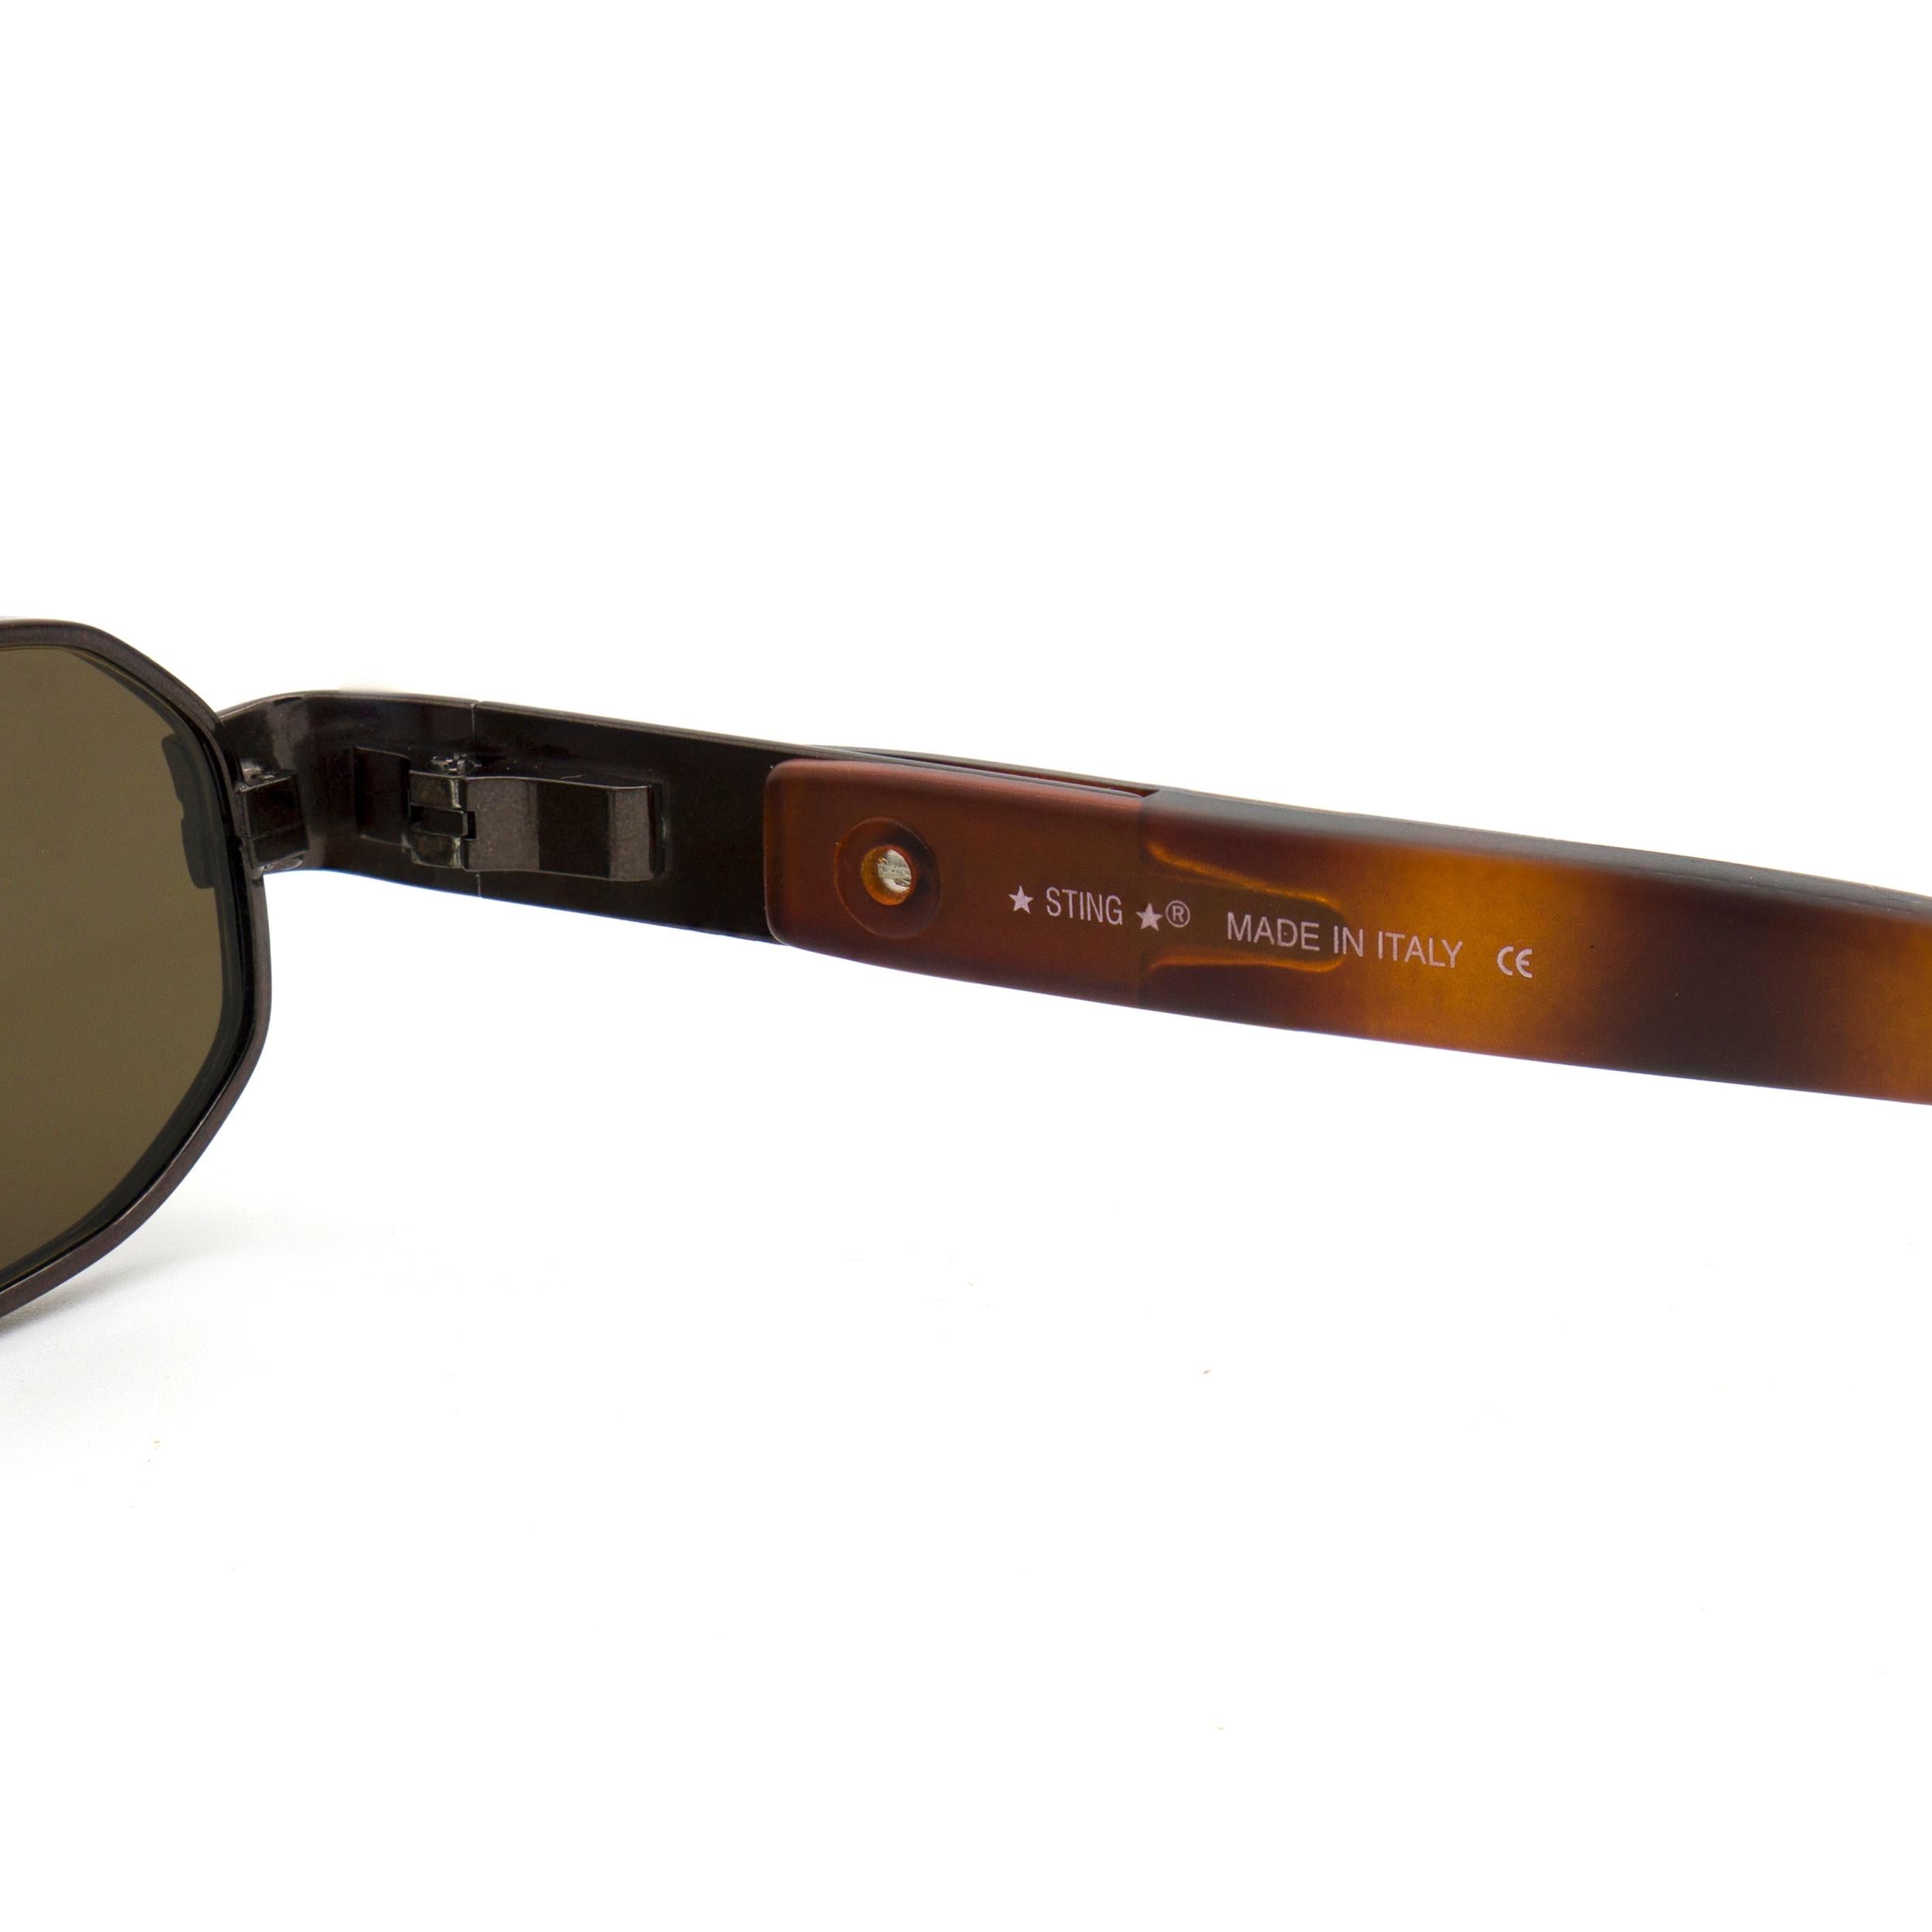 Hexagonal vintage sunglasses by Sting, Italy  In New Condition For Sale In Santa Clarita, CA